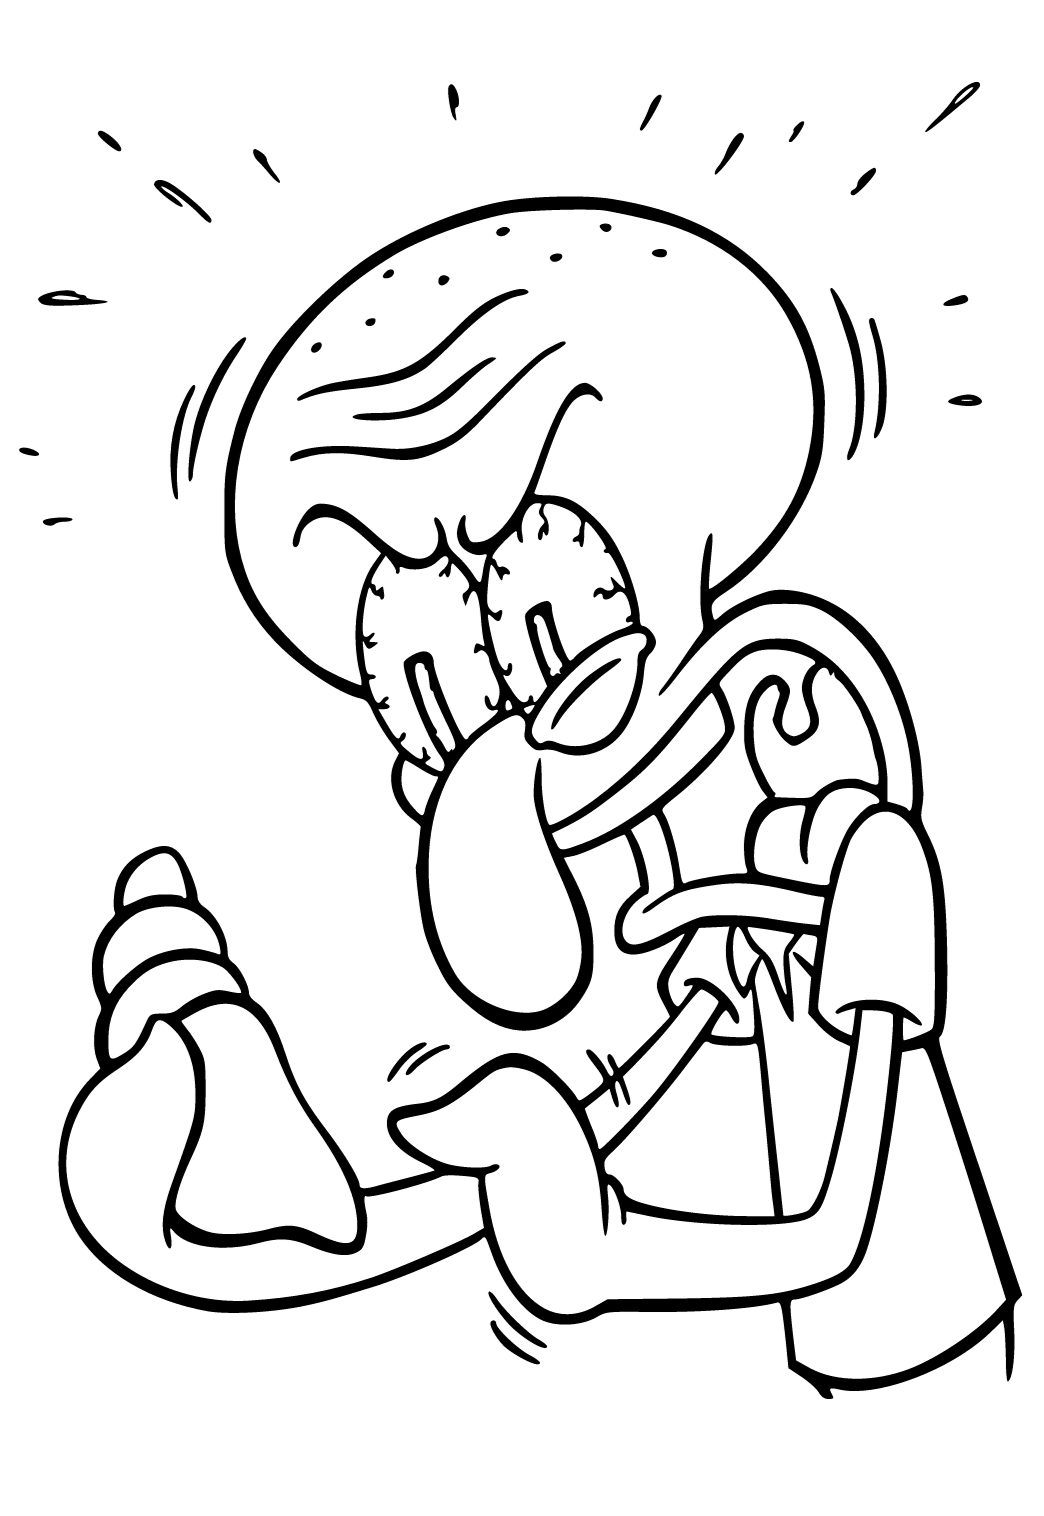 Free printable squidward aggression coloring page for adults and kids